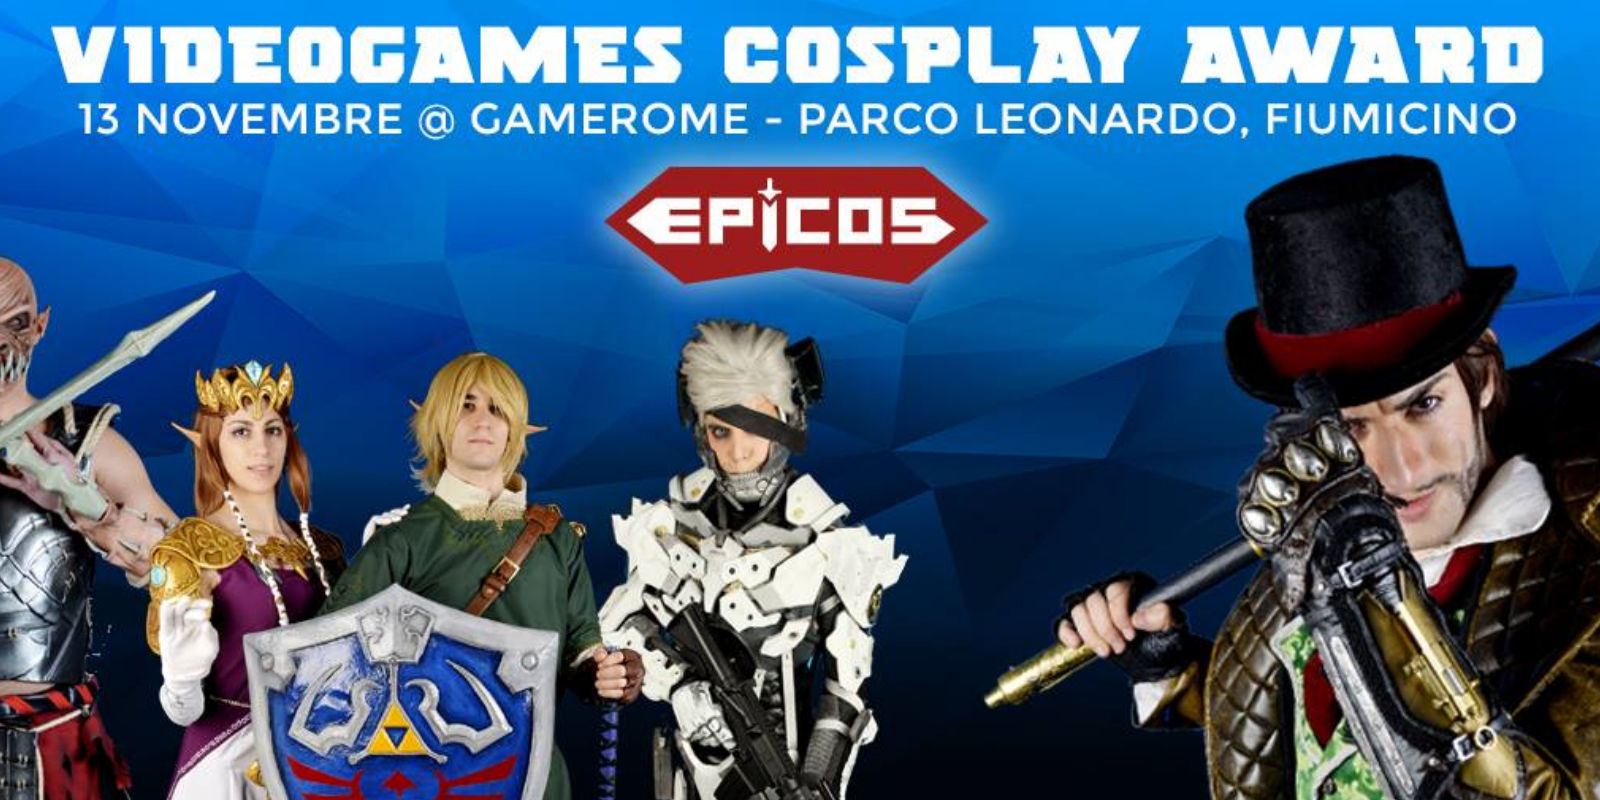 Videogames Cosplay Award a Gamerome 2016